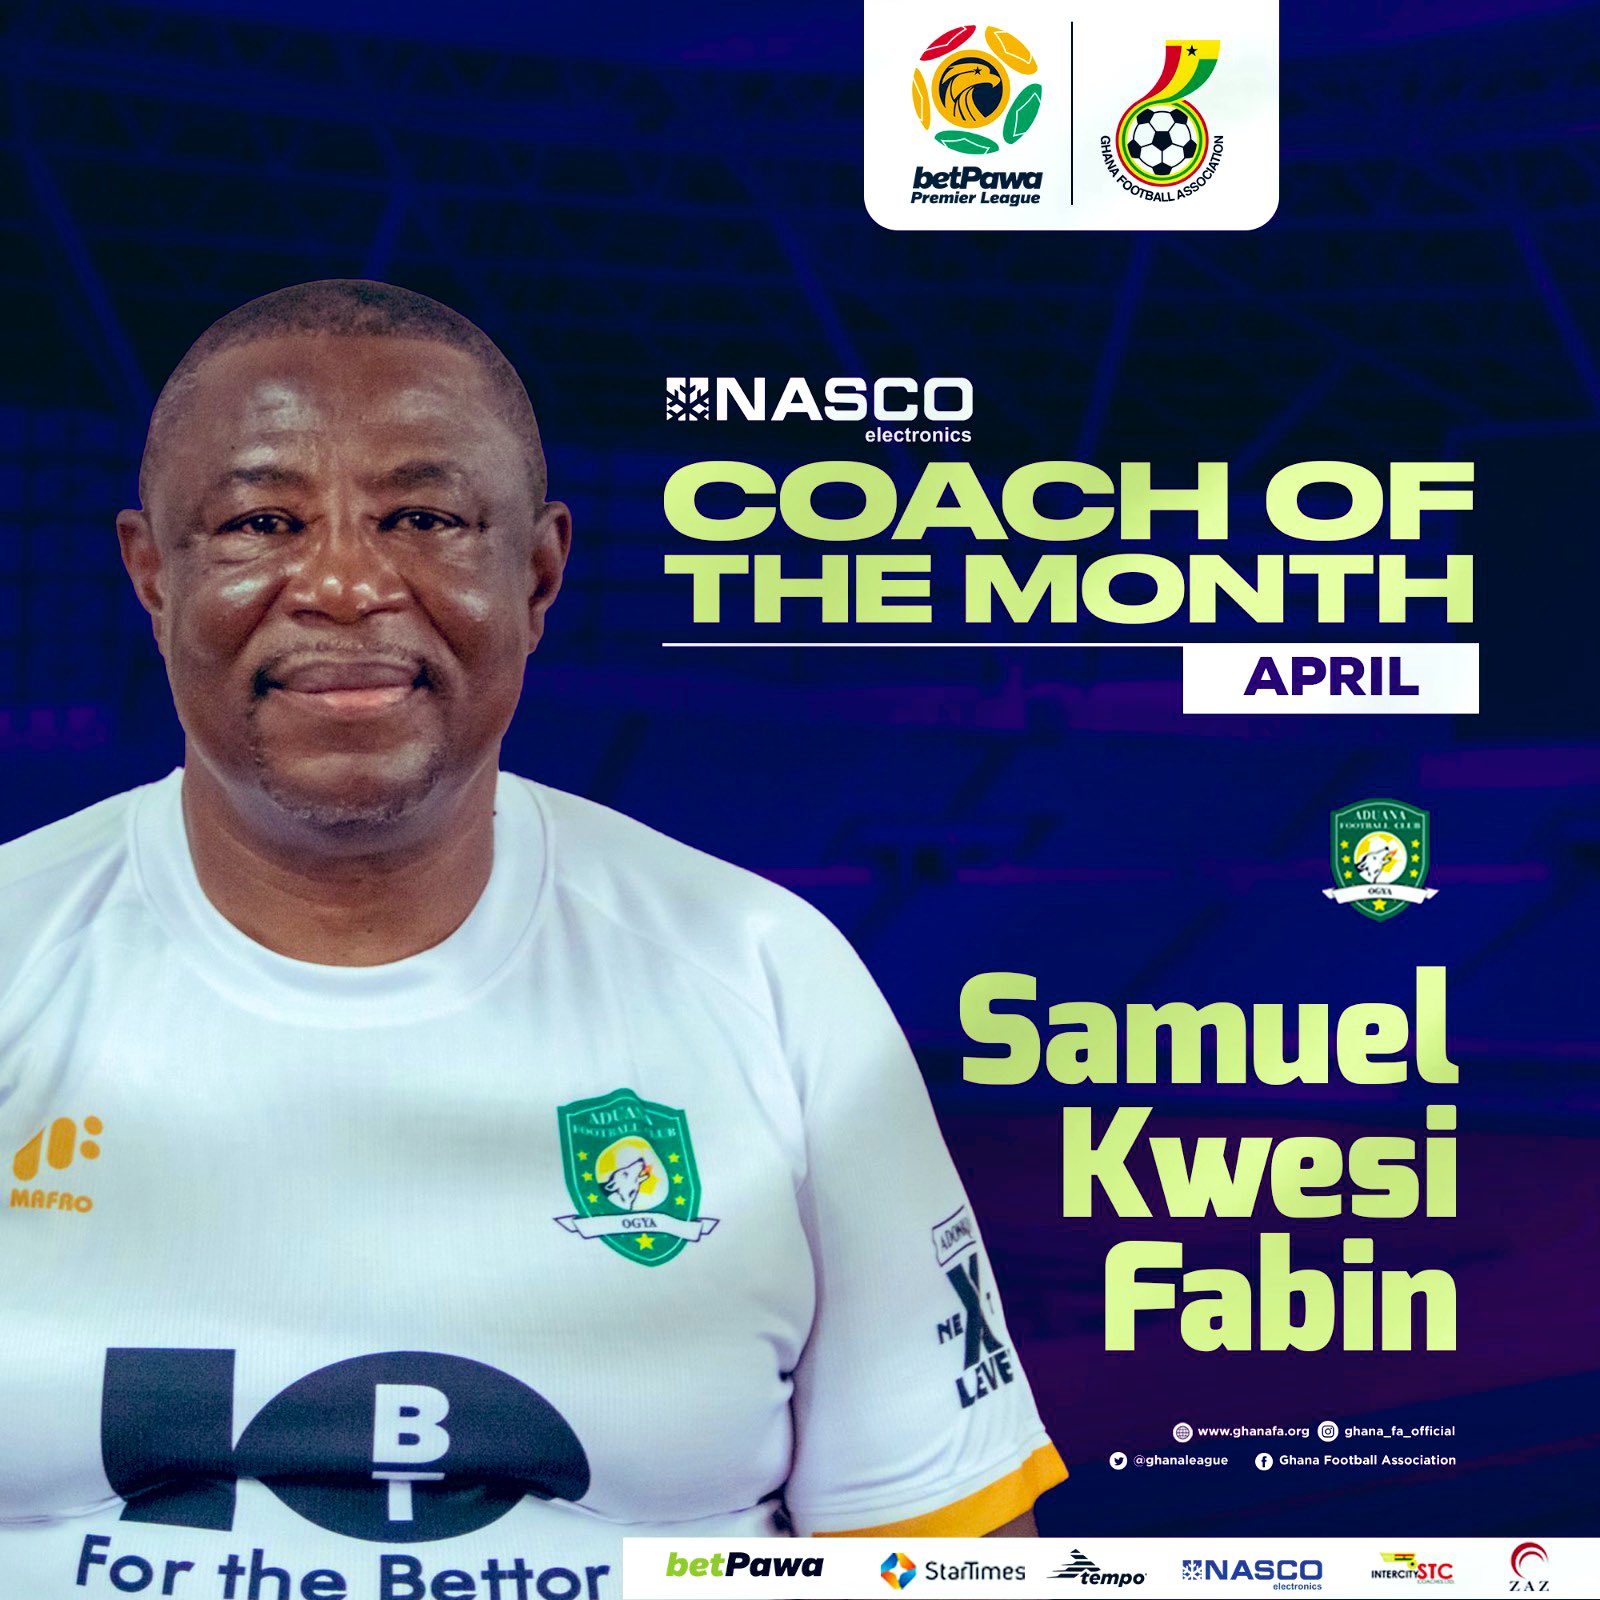 Aduana FC's Paa Kwesi Fabin named NASCO Coach of the Month for April